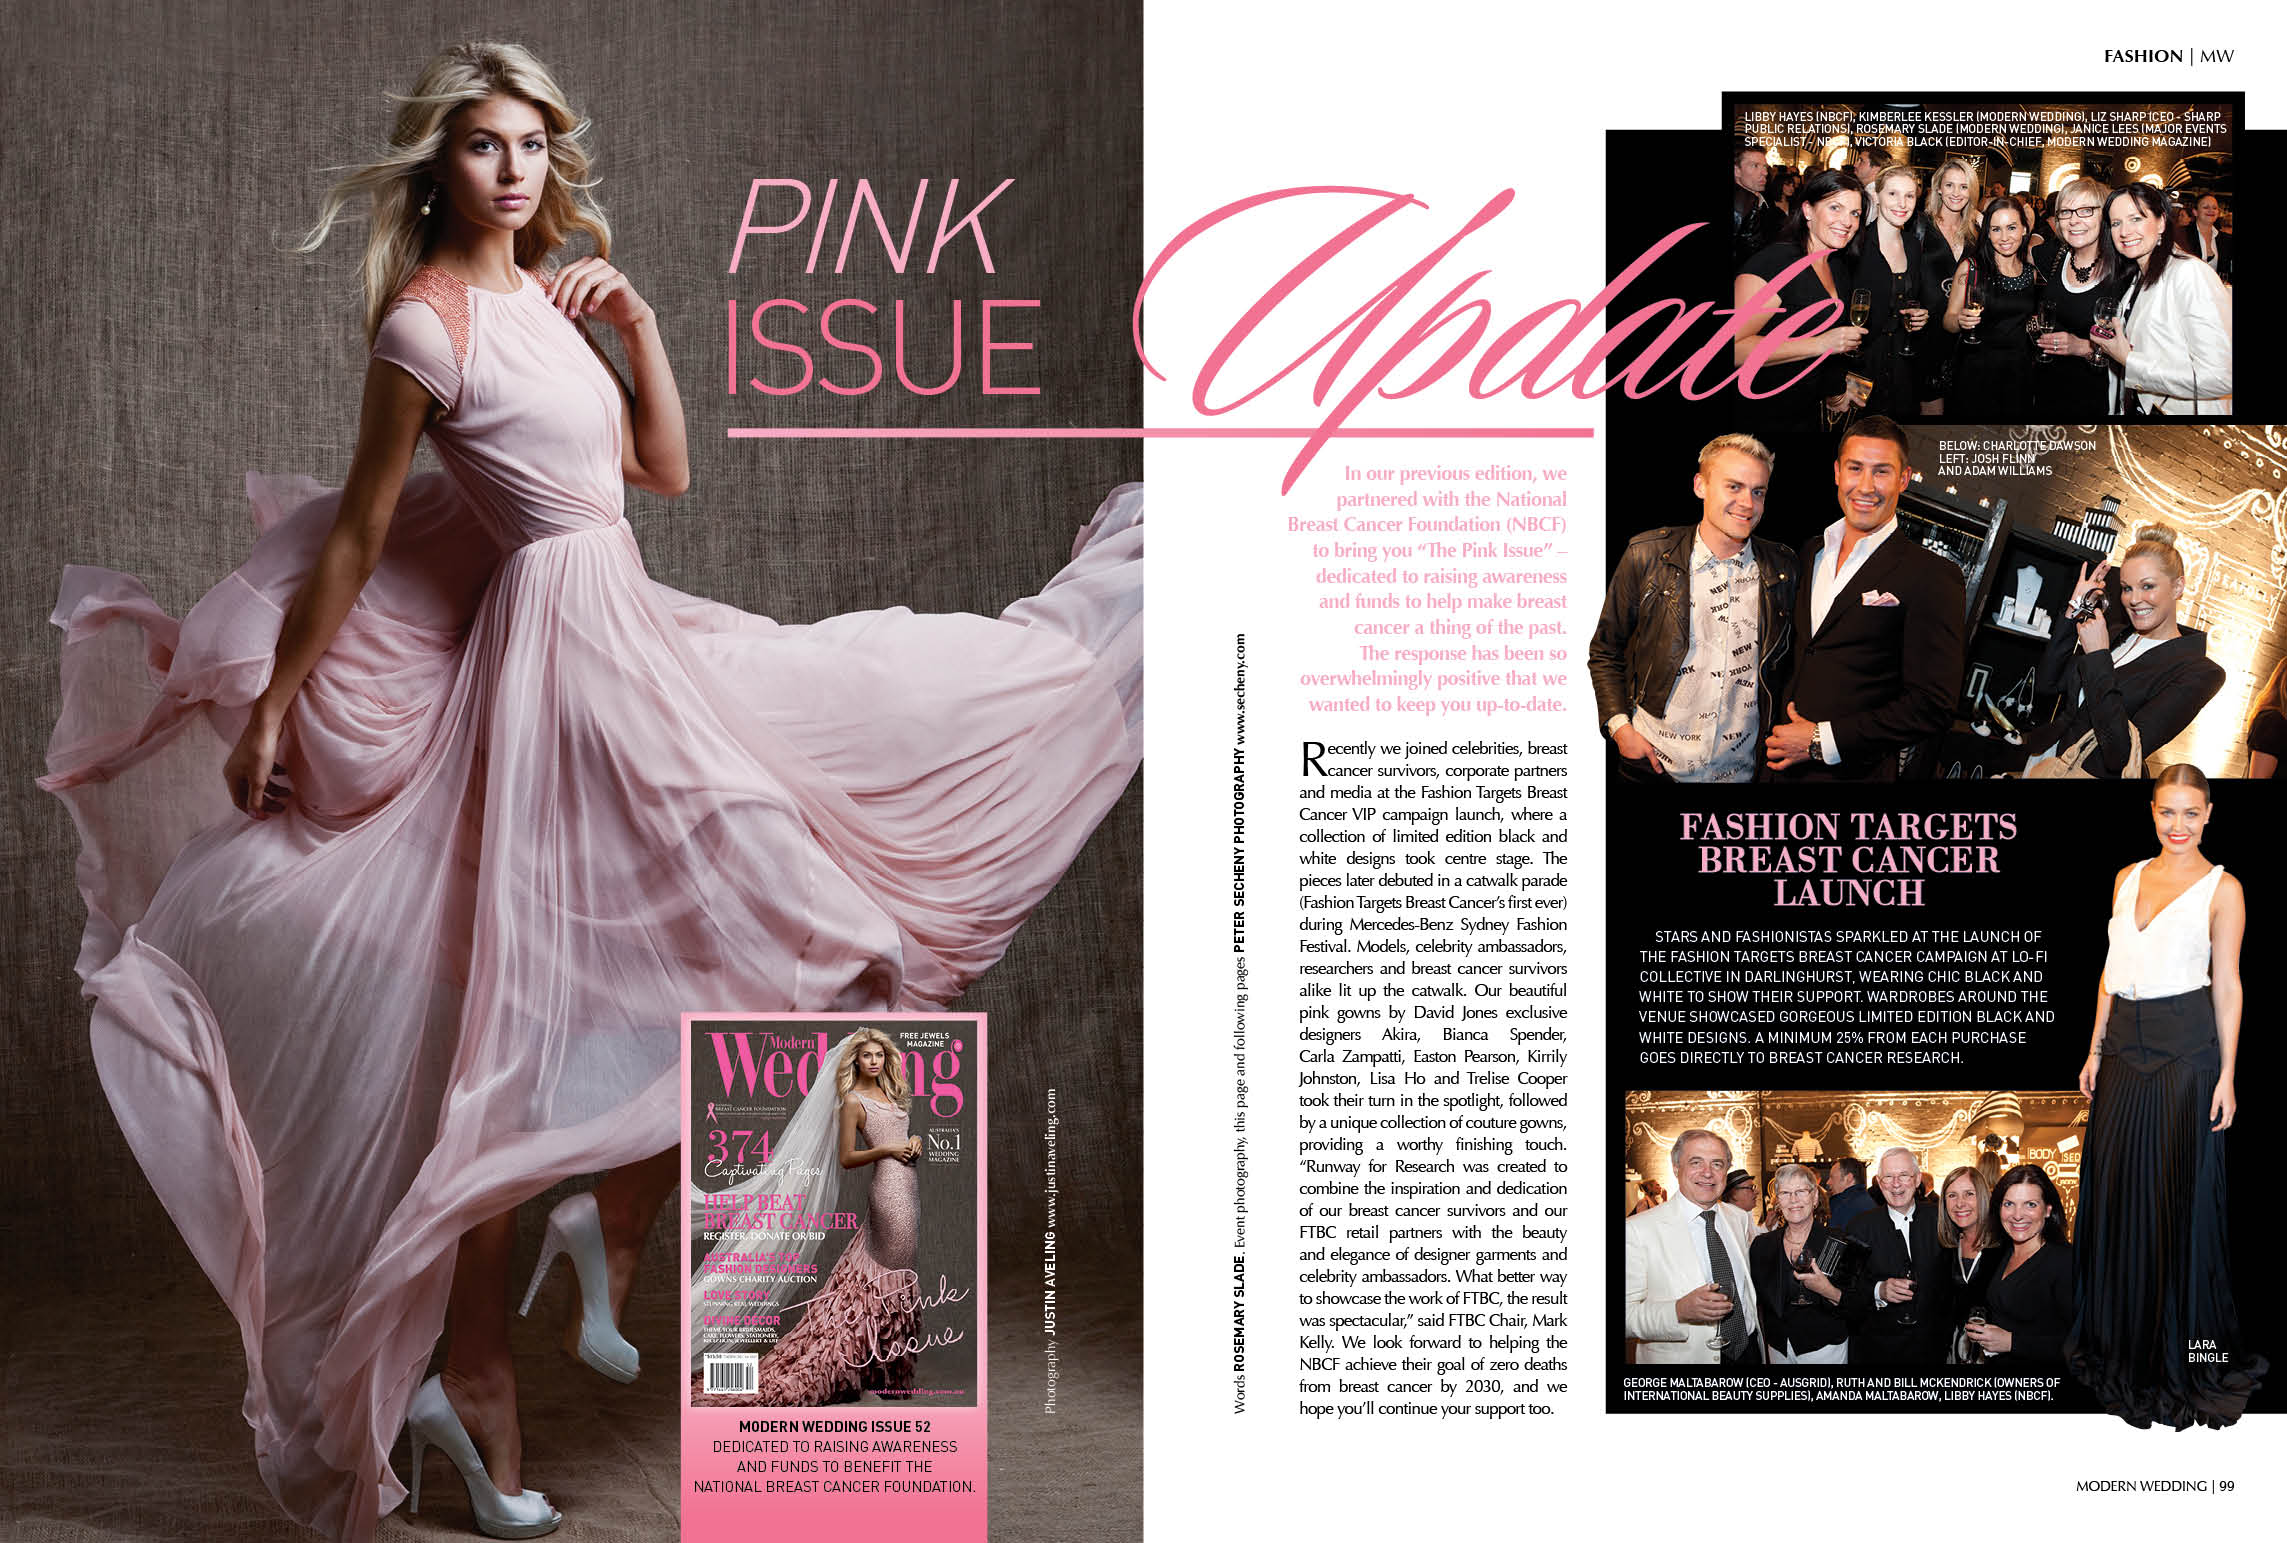 Pink wedding dresses and National Breast Cancer Foundation